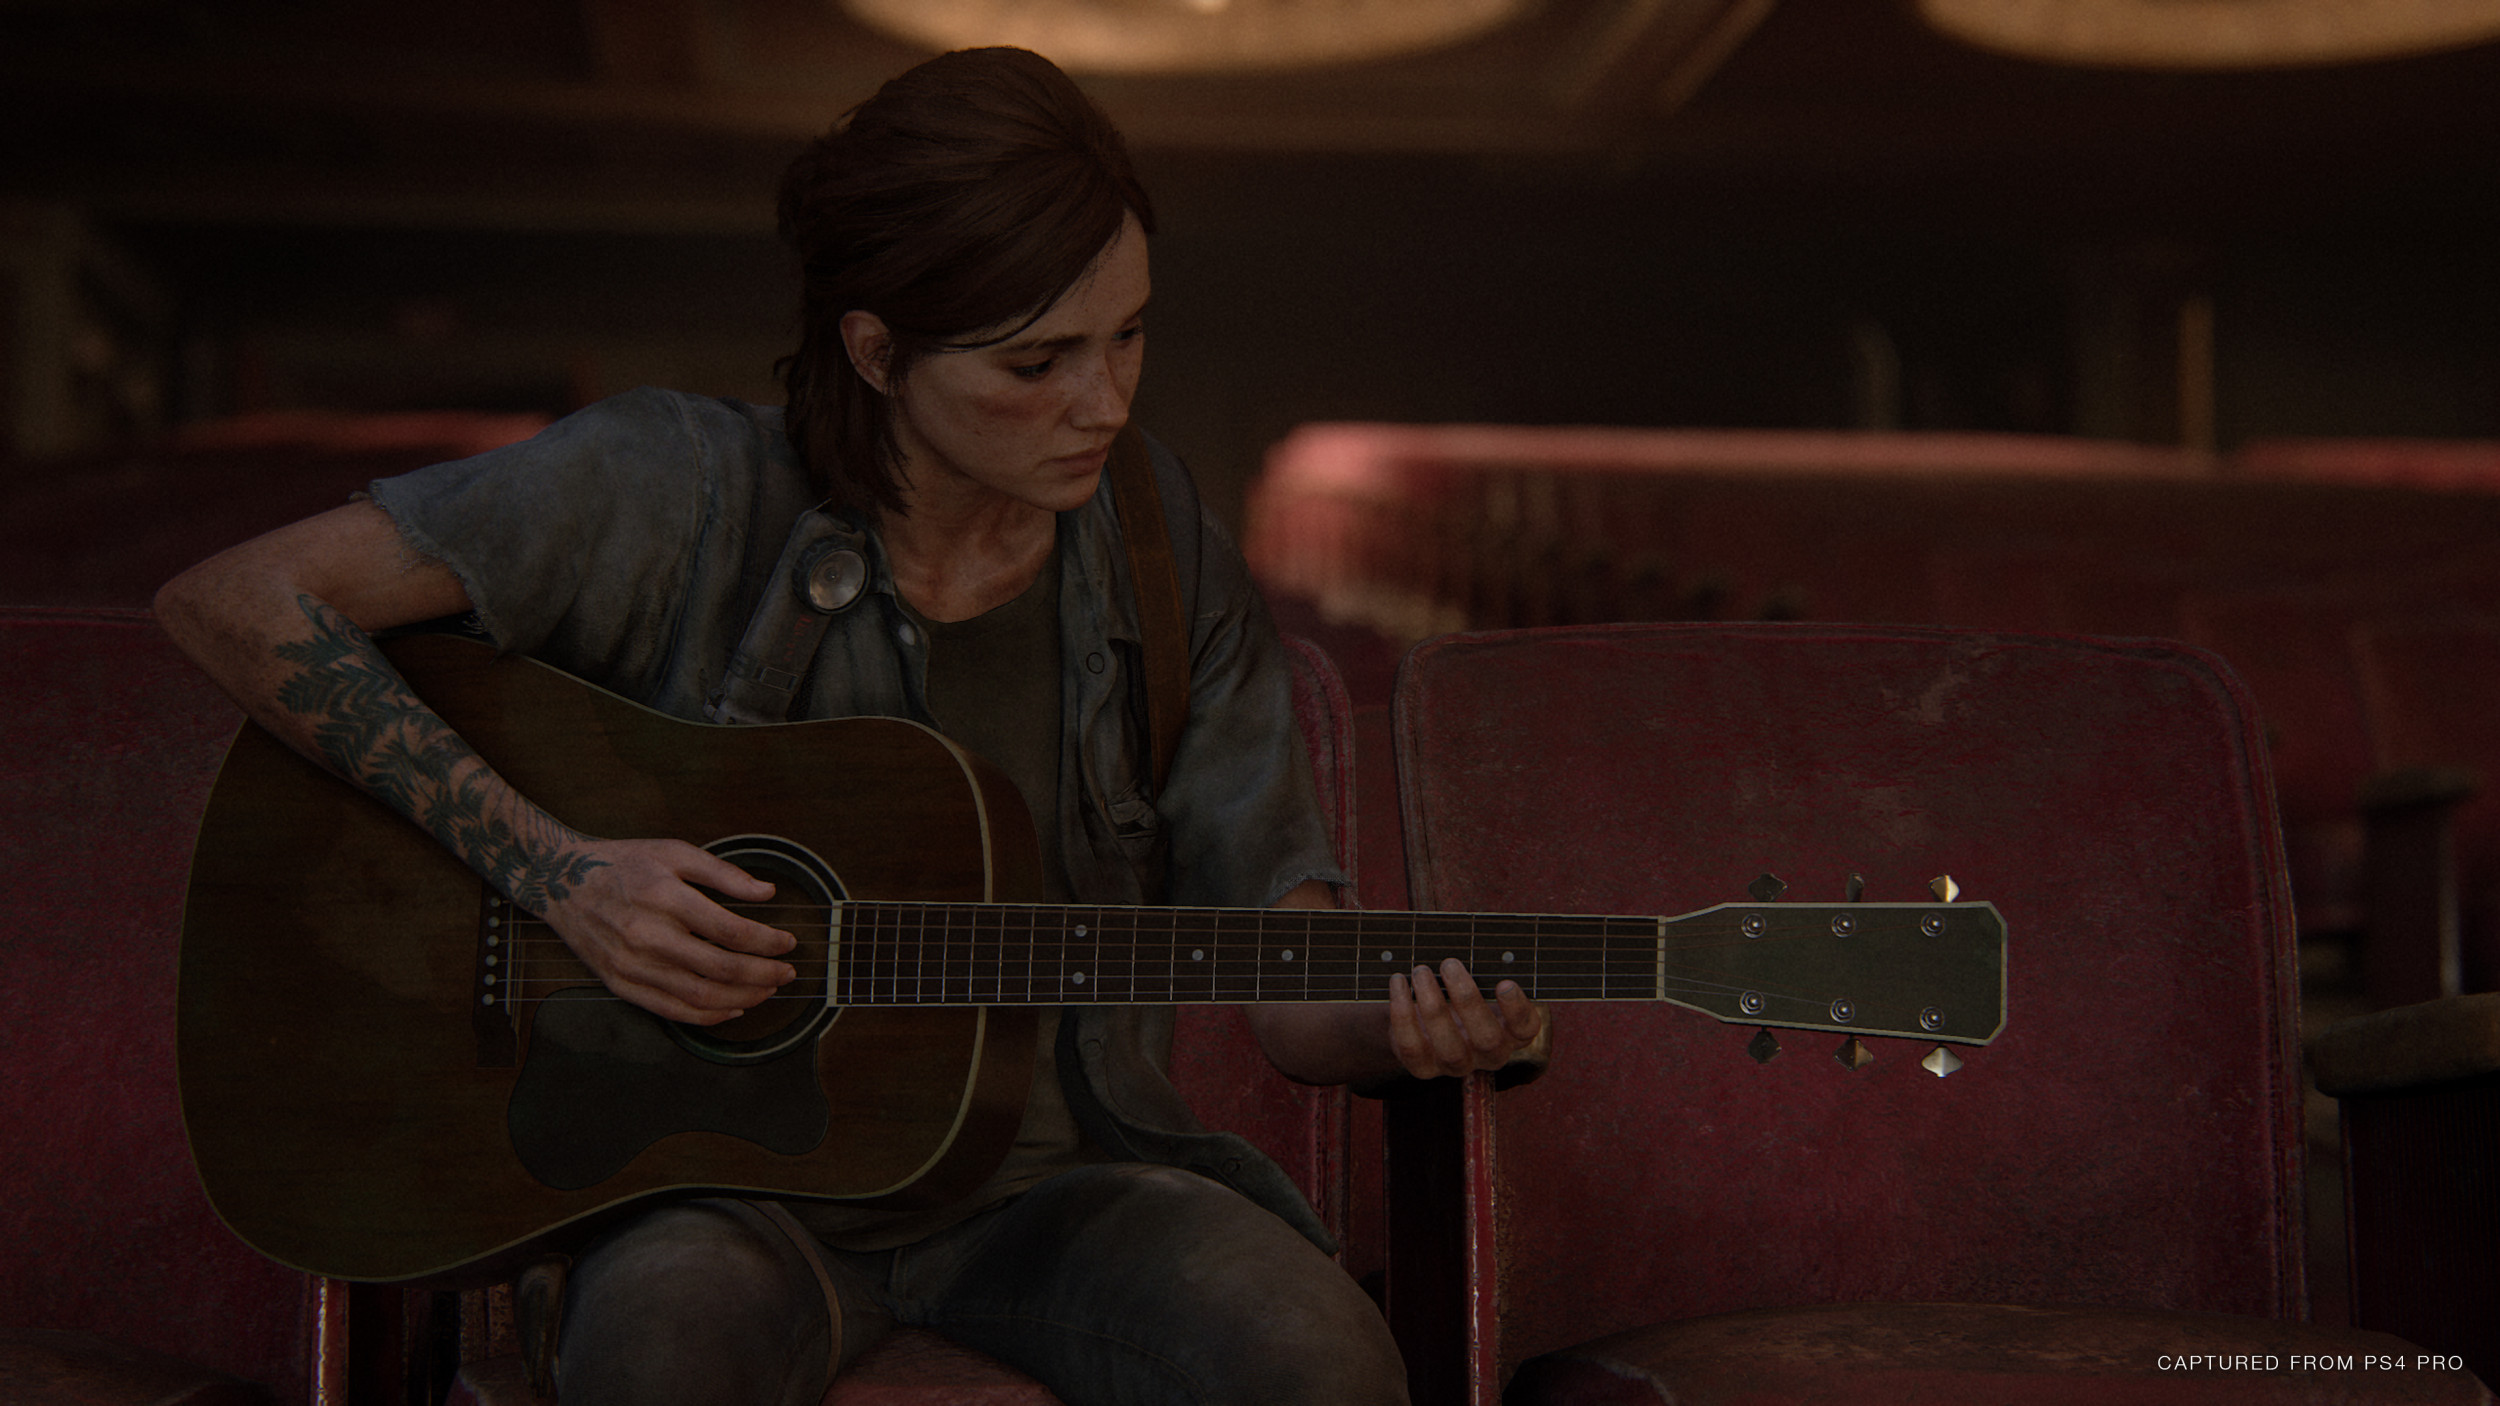 Game Length, How Long is The Last of Us Part II?